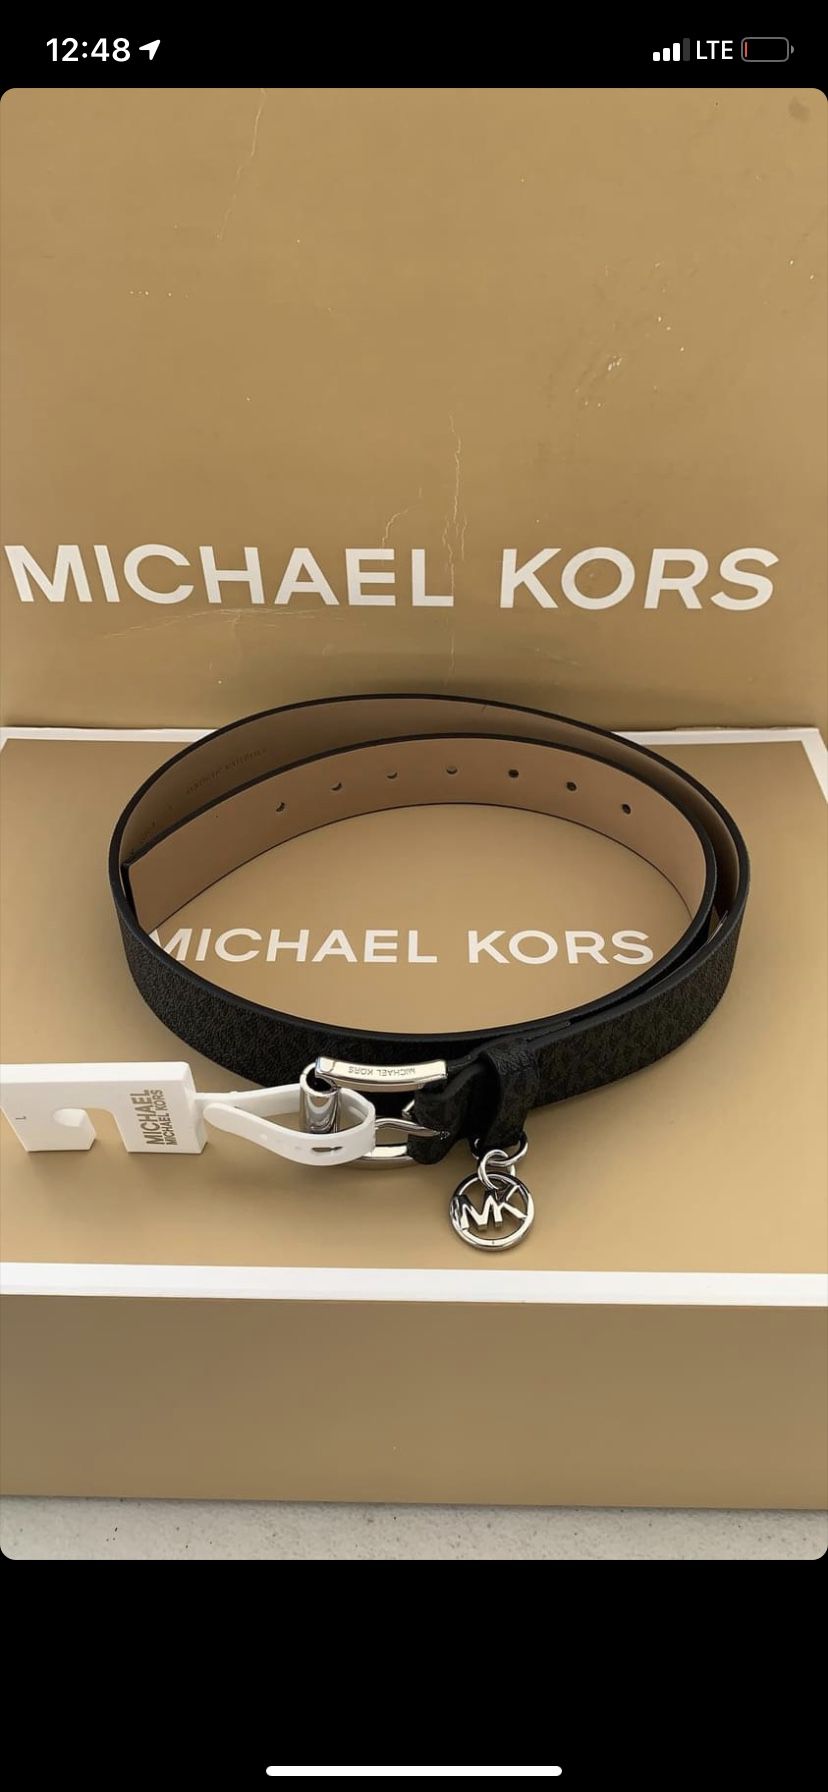 Michael Kors Women’s Belt - black NWT Size Large Serious inquires only please Low offers will be ignored Pick up location in the city of poco Rivera